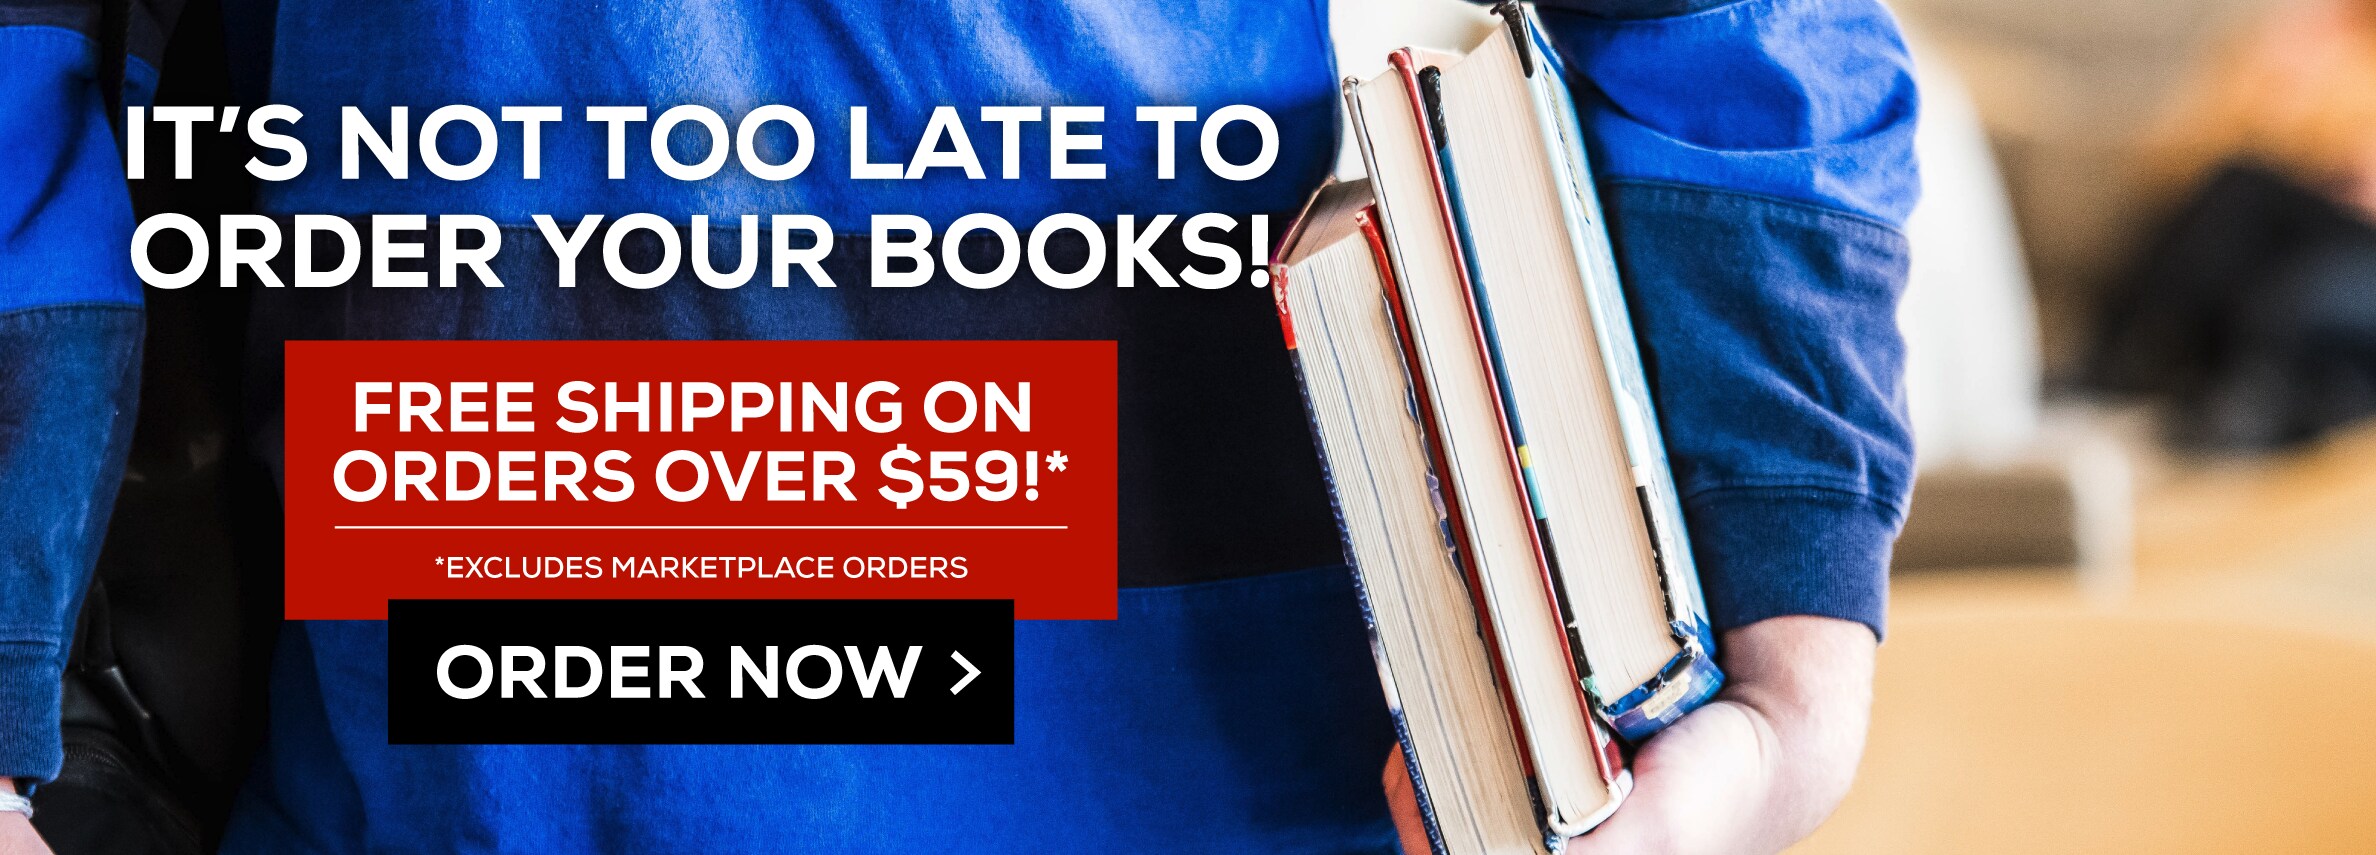 It's not too late to order your books! Free Shipping on Orders Over $59!* Excludes marketplace purchases. Order Now.